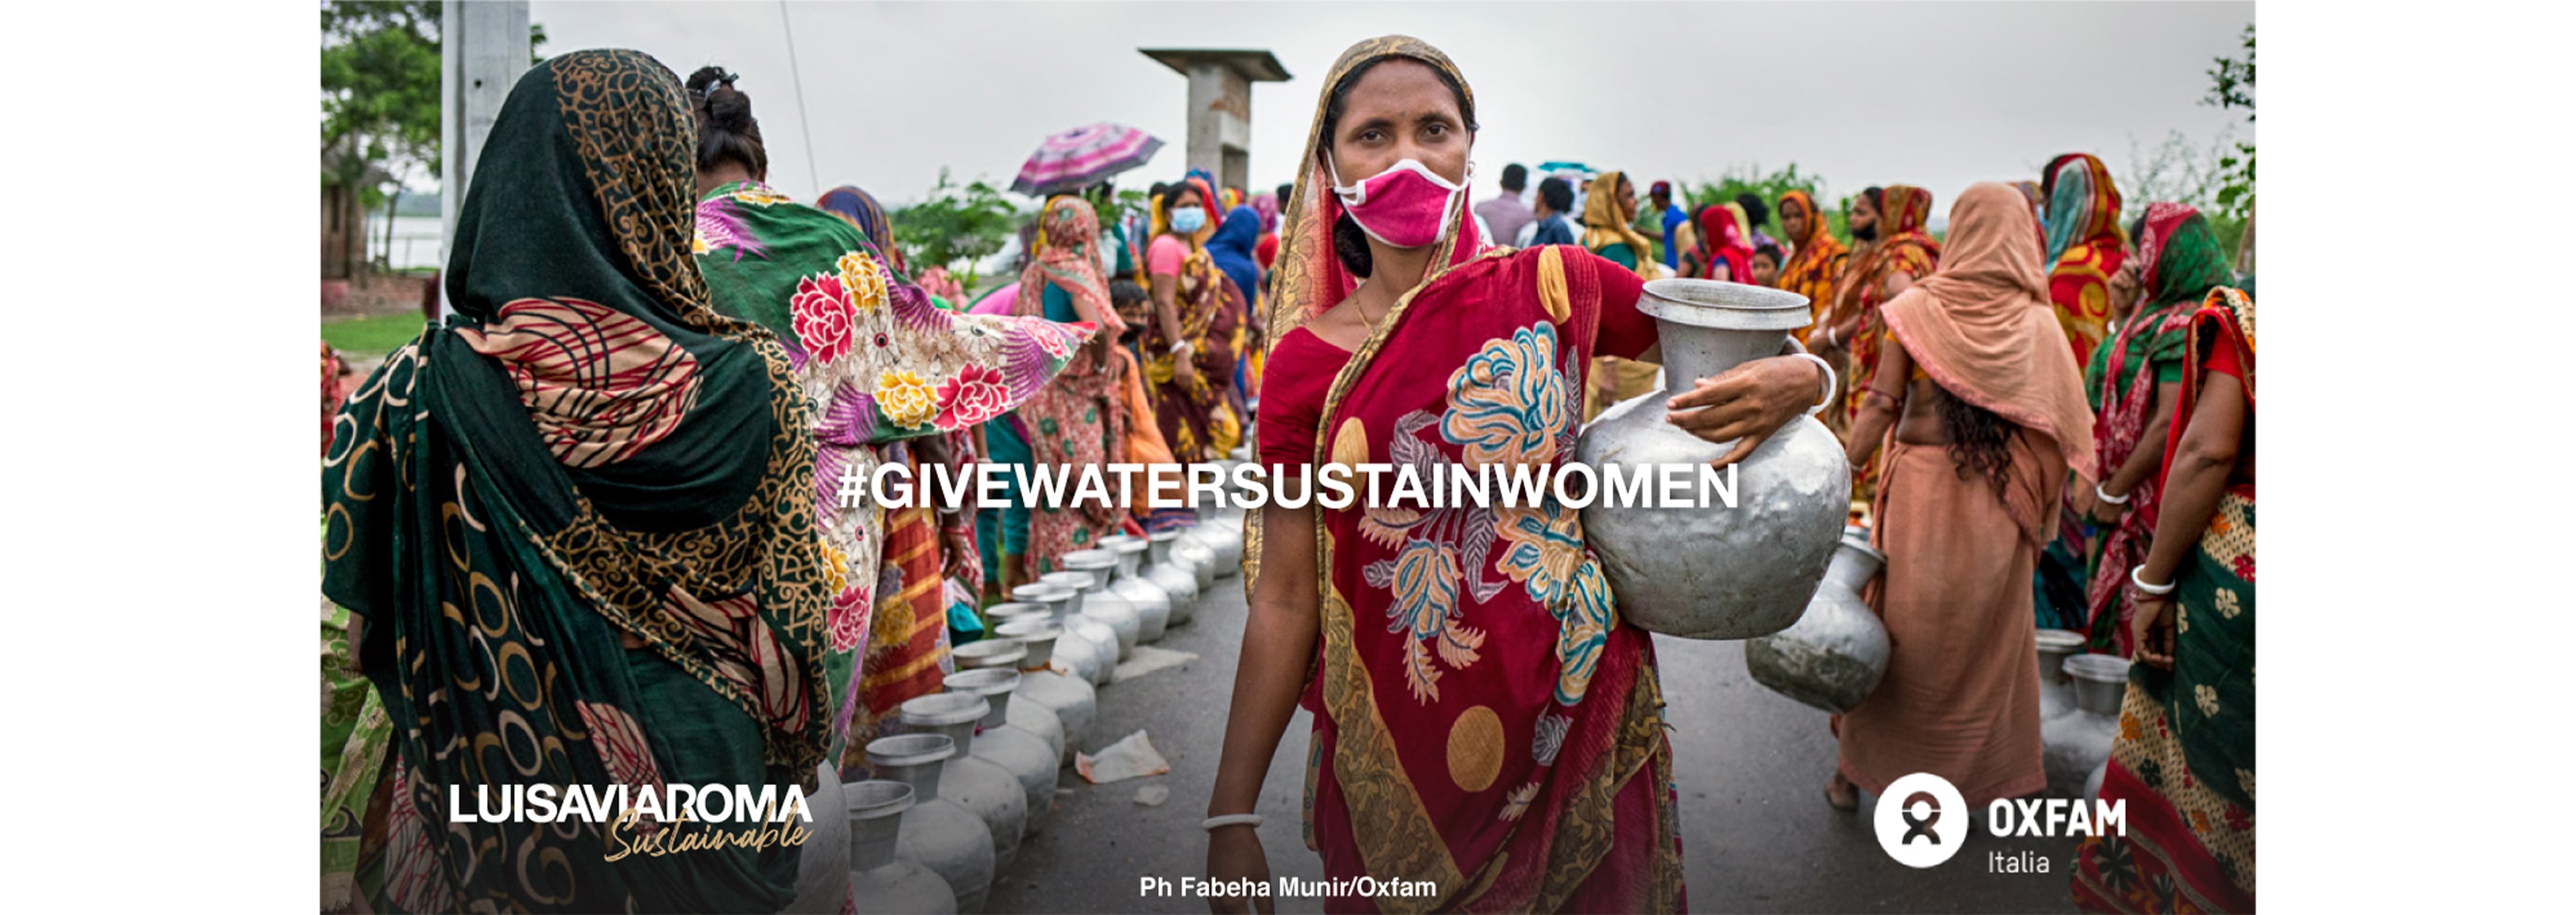 LVRSustainable & Oxfam Italy “Give Water, Sustain Women”: 活动成果与成就